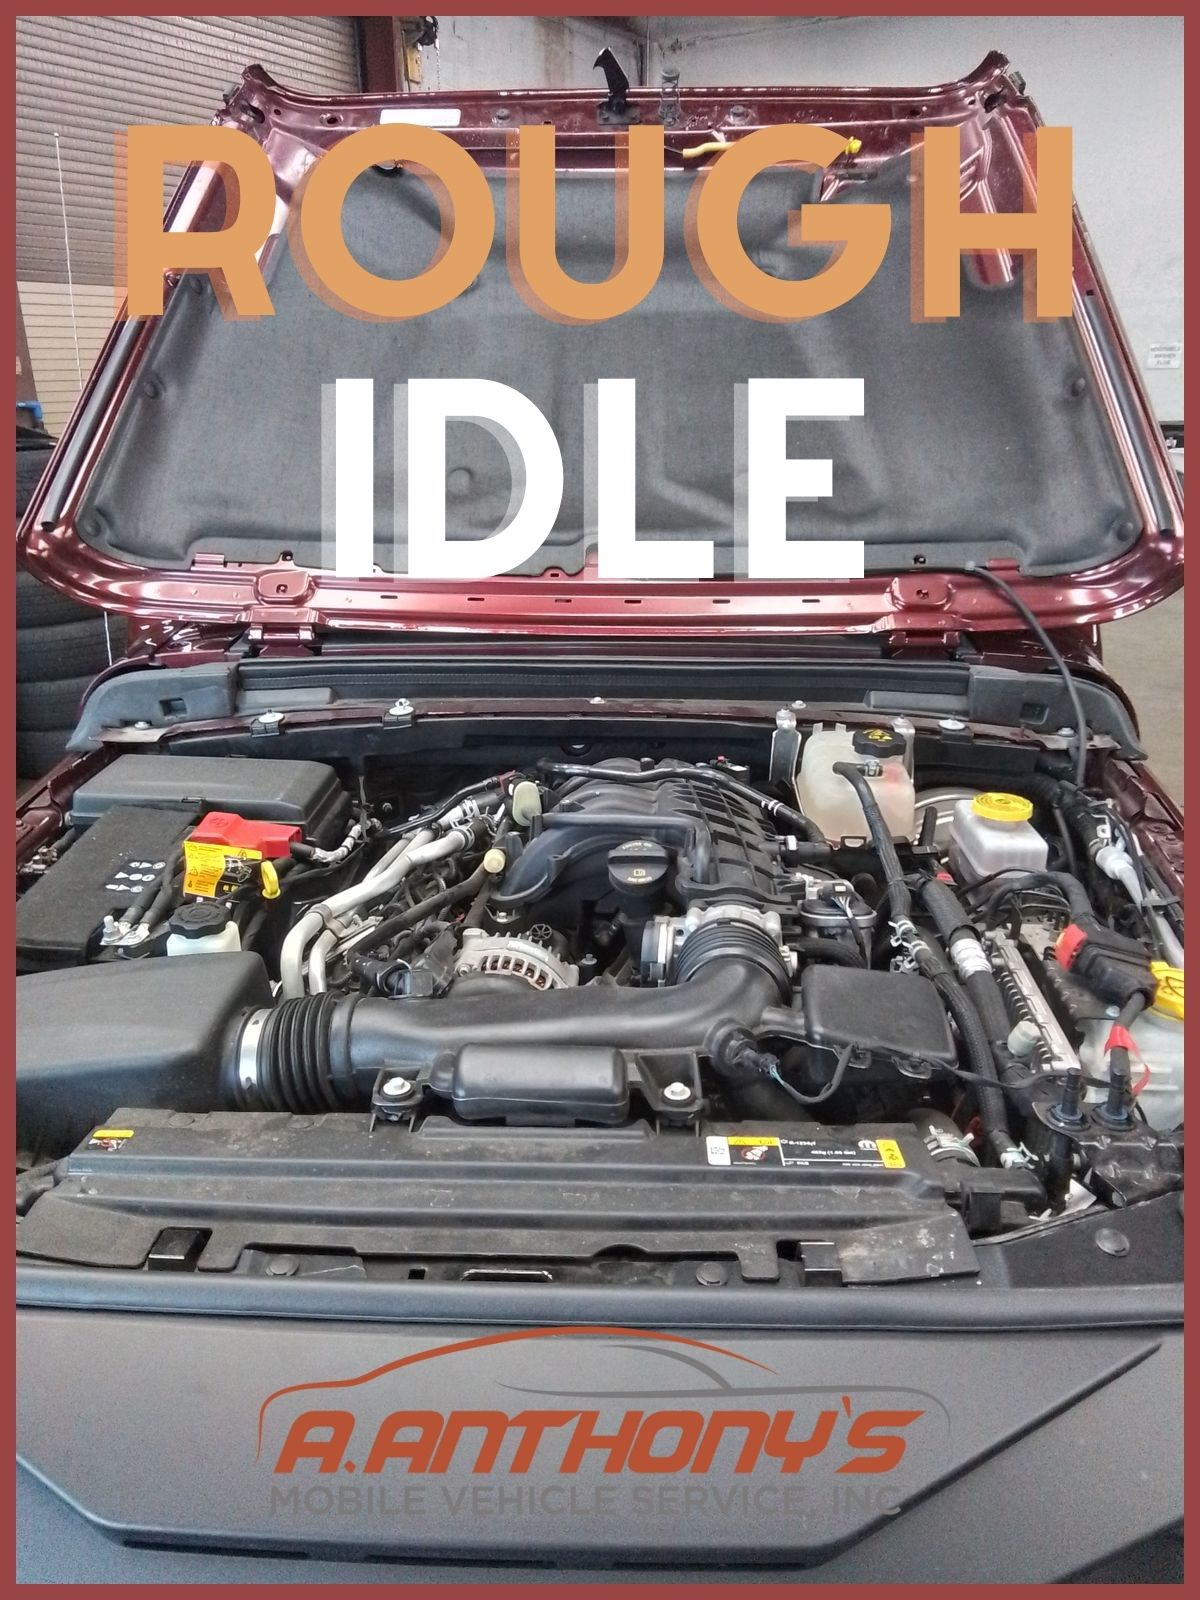 What Is A Rough Idle?